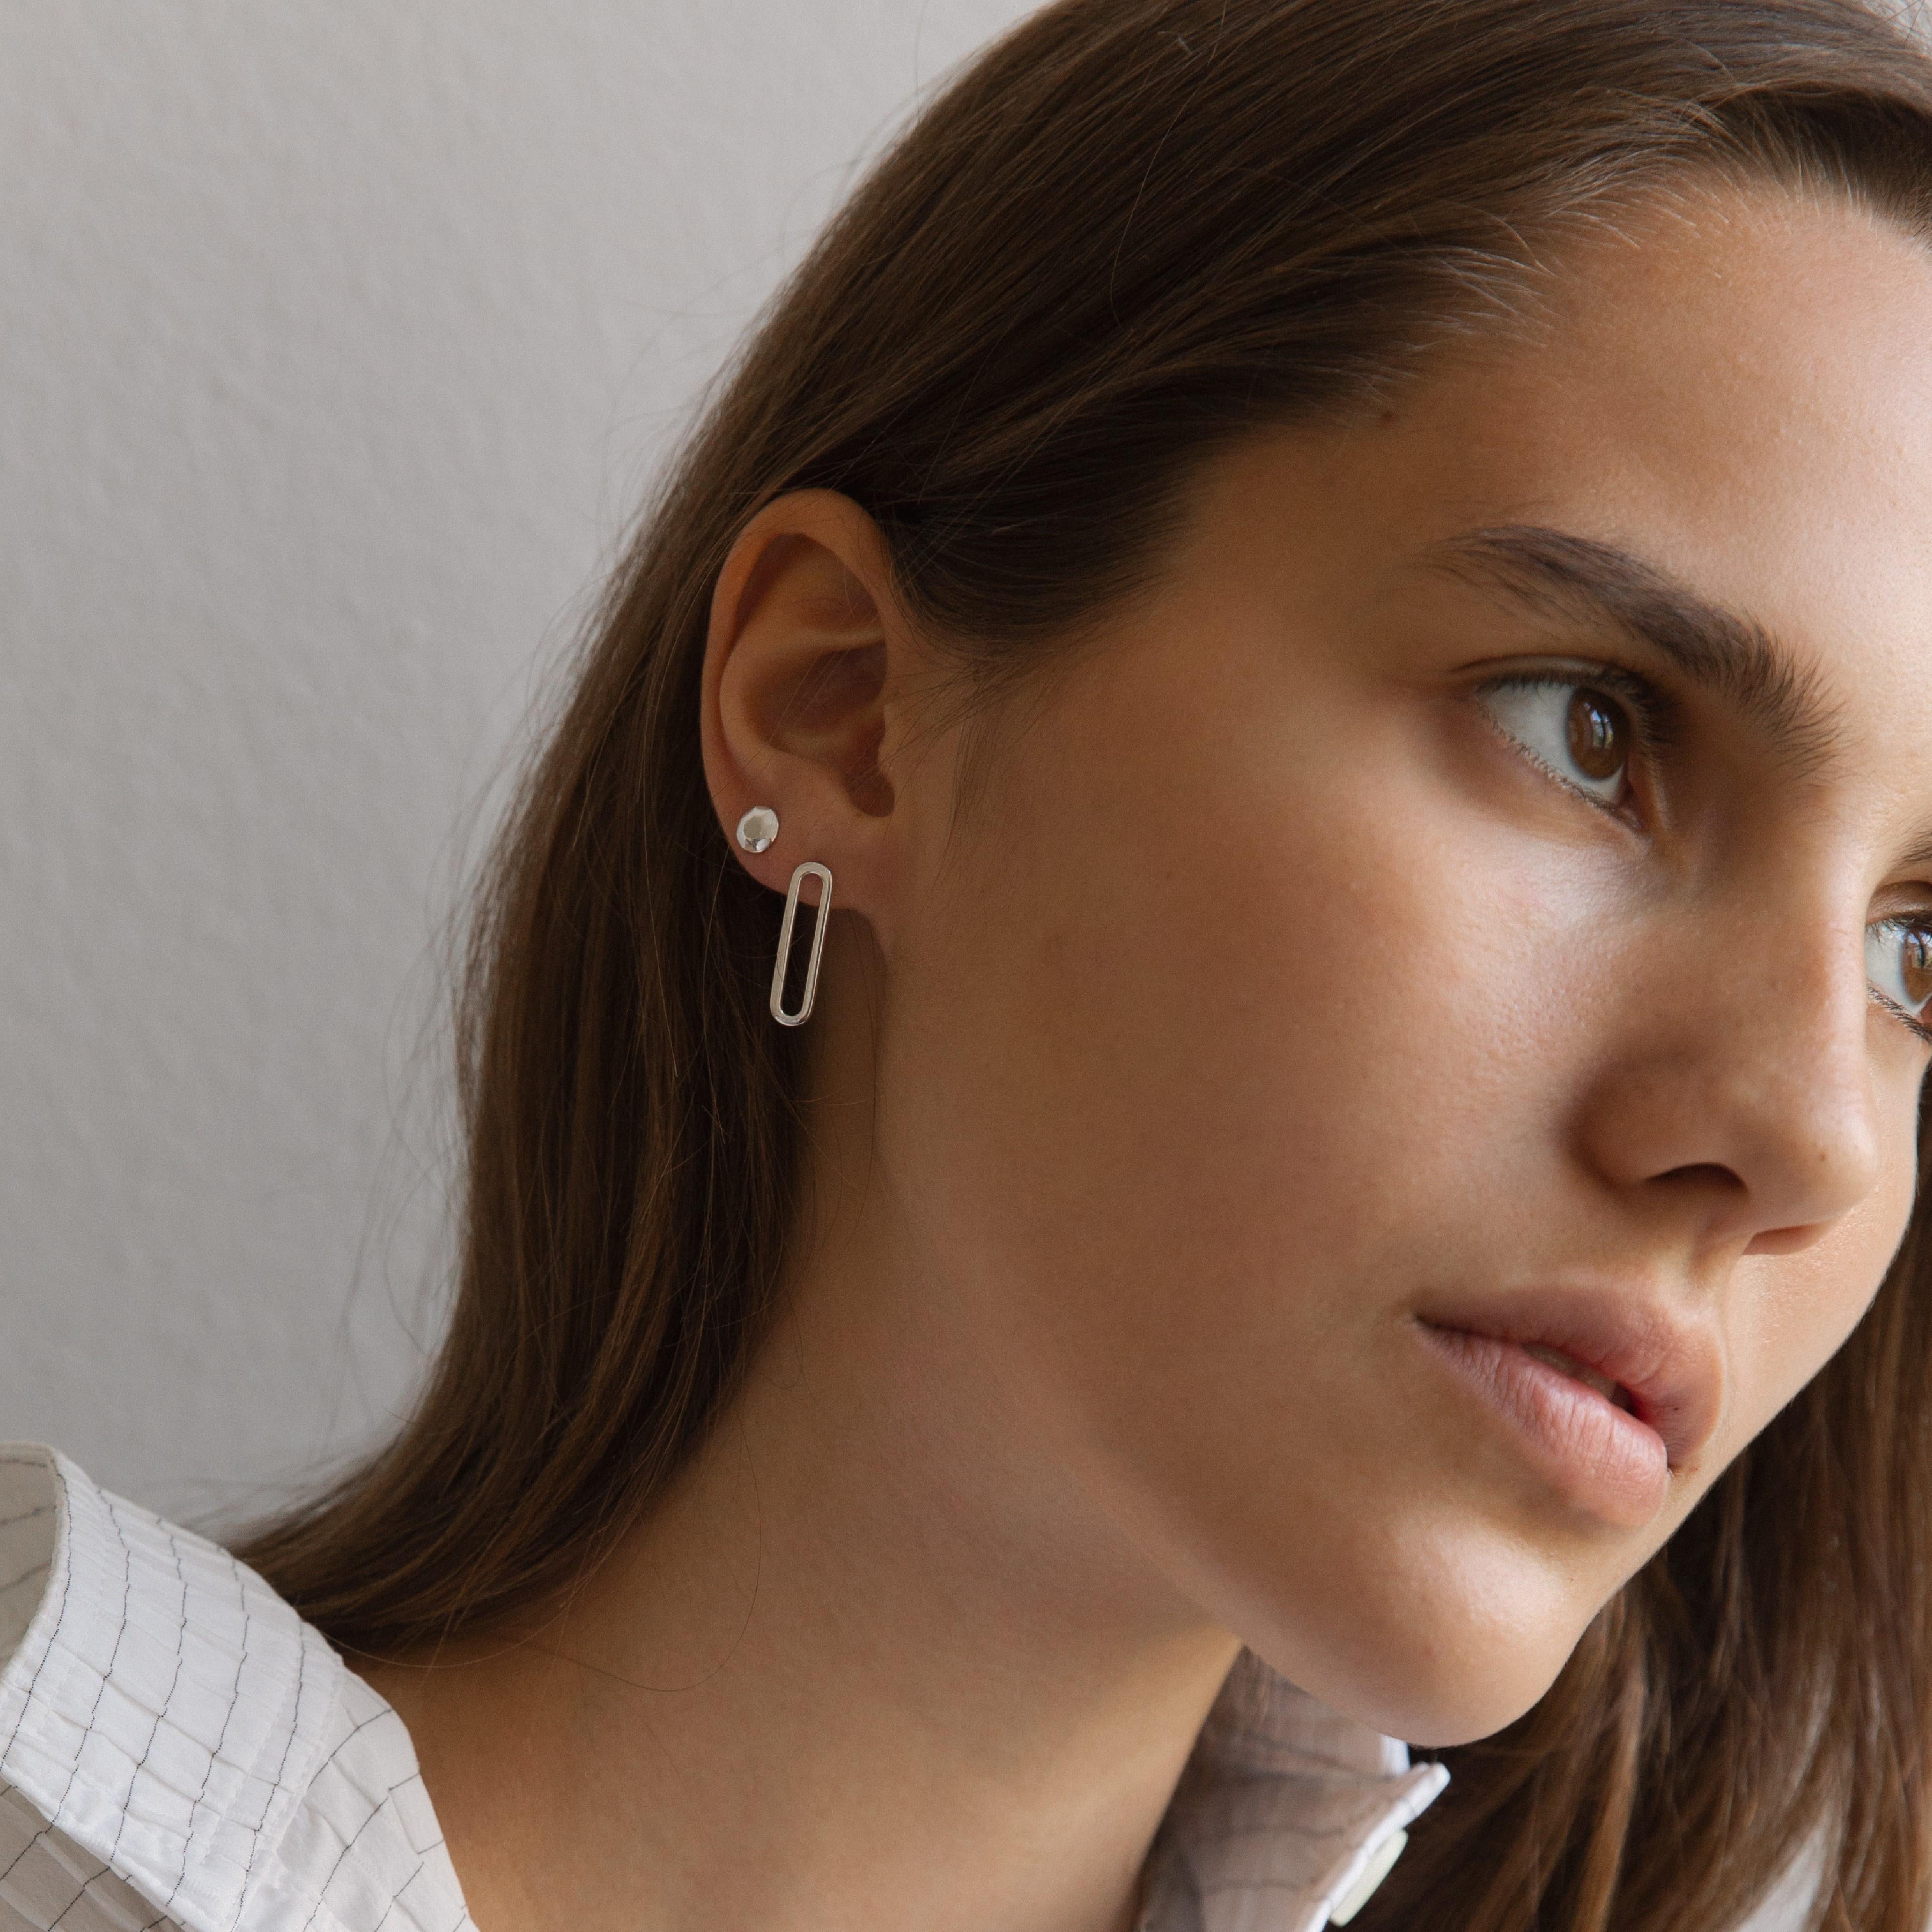 A modern classic, this fine earring is handmade in solid recycled sterling silver. It presents the single link that is the very core idea of our Oxygen Collection, inspired by the traditional art of Japanese wood joinery.

Dimensions:
Lenght: 2